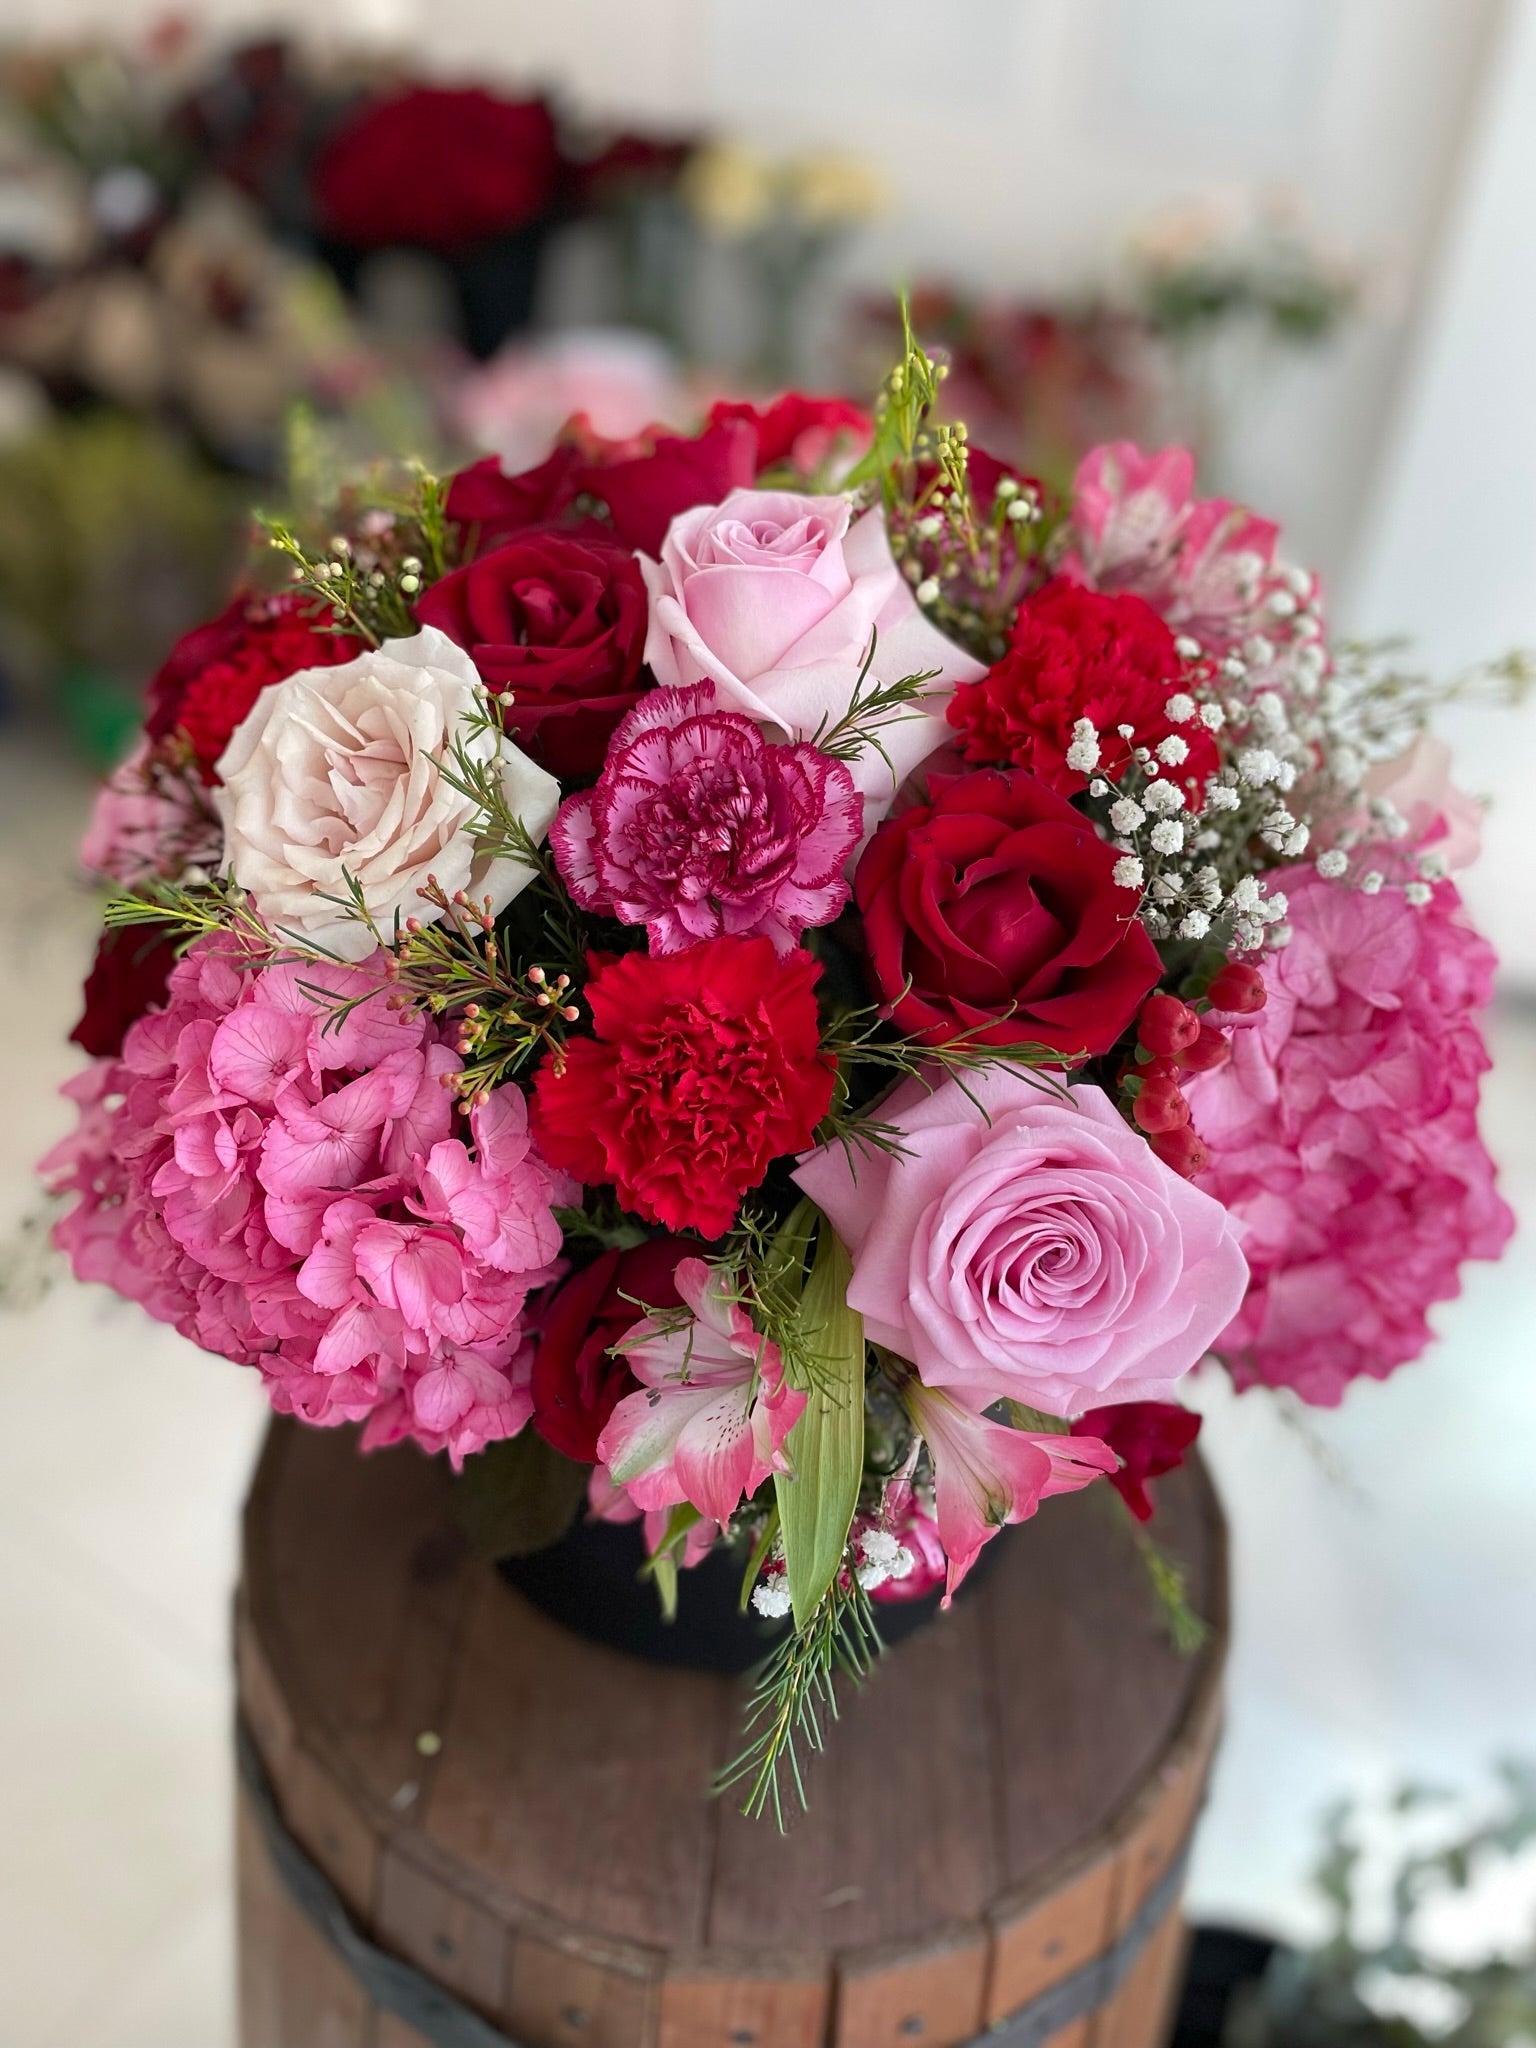 Mixed red, pink and white flowers